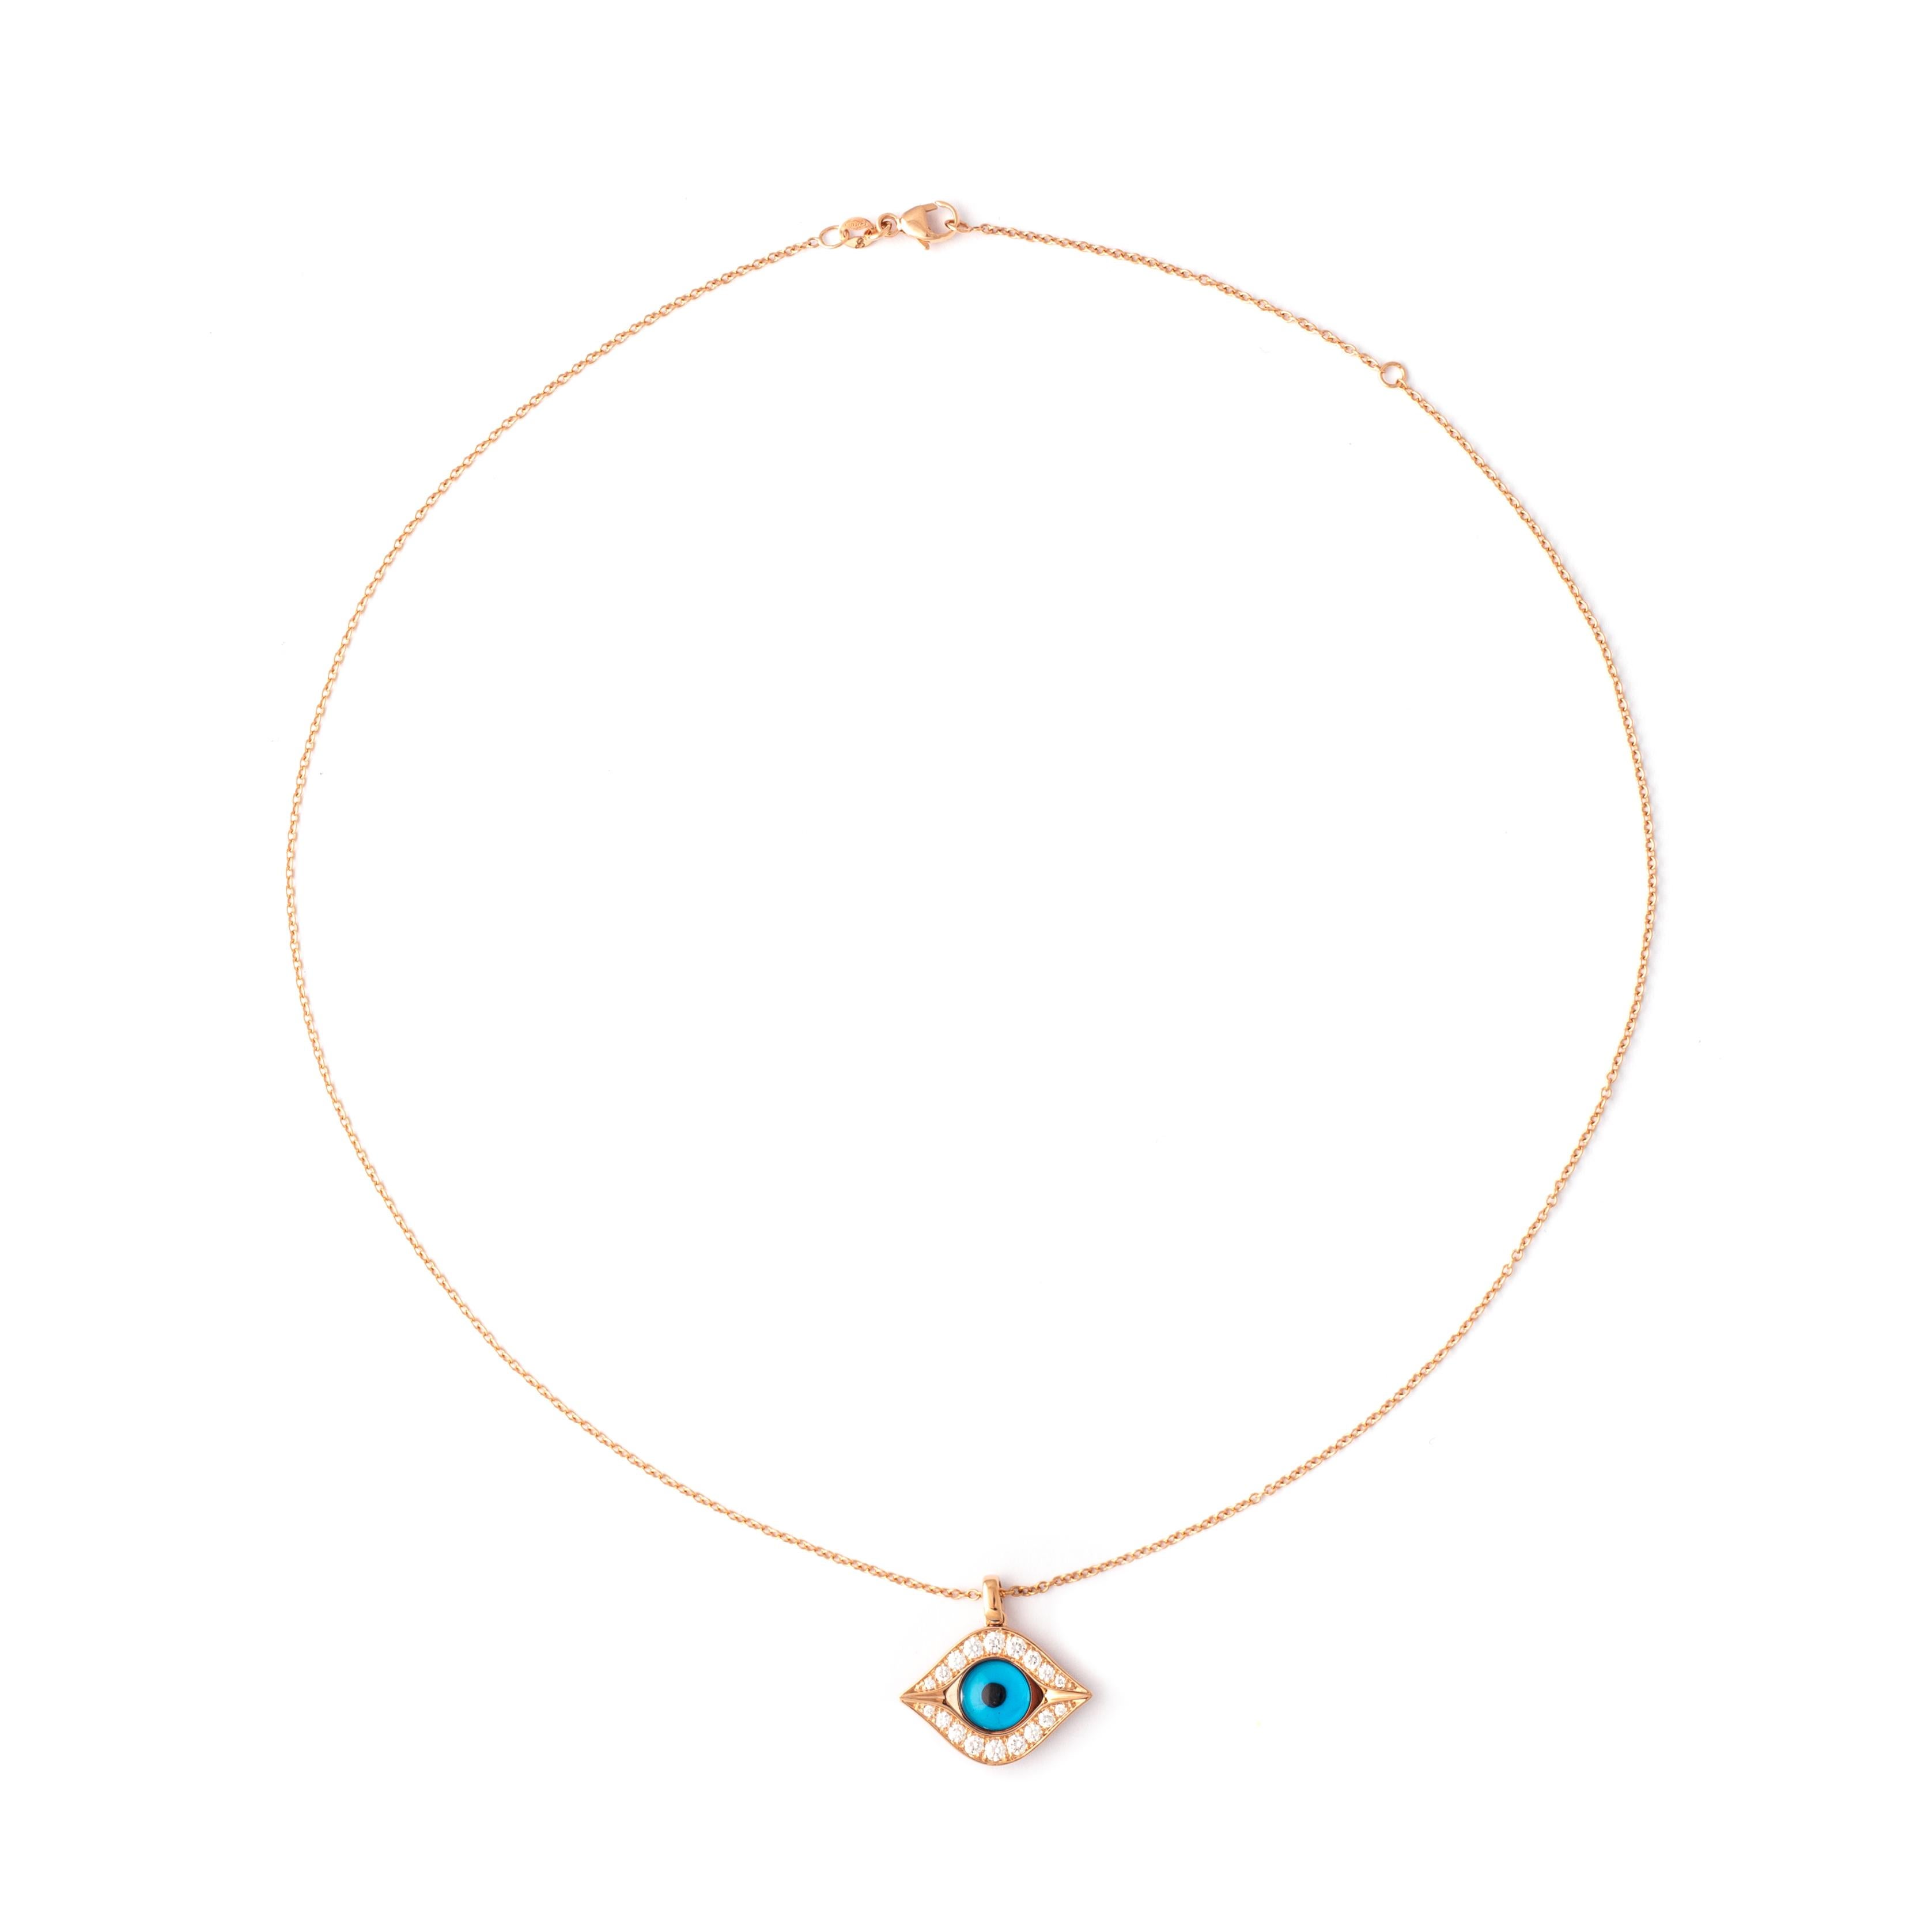 Eye pendant necklace in 18kt pink gold set with 18 diamonds 0.40 cts.

Length: 40.00 centimeters ( 15.75 inches) up to 44.50 centimeters (17.52 inches).

Pendant length : 2.00 centimeters ( 0.79 inches) .

Total weight: 5.25 grams. 